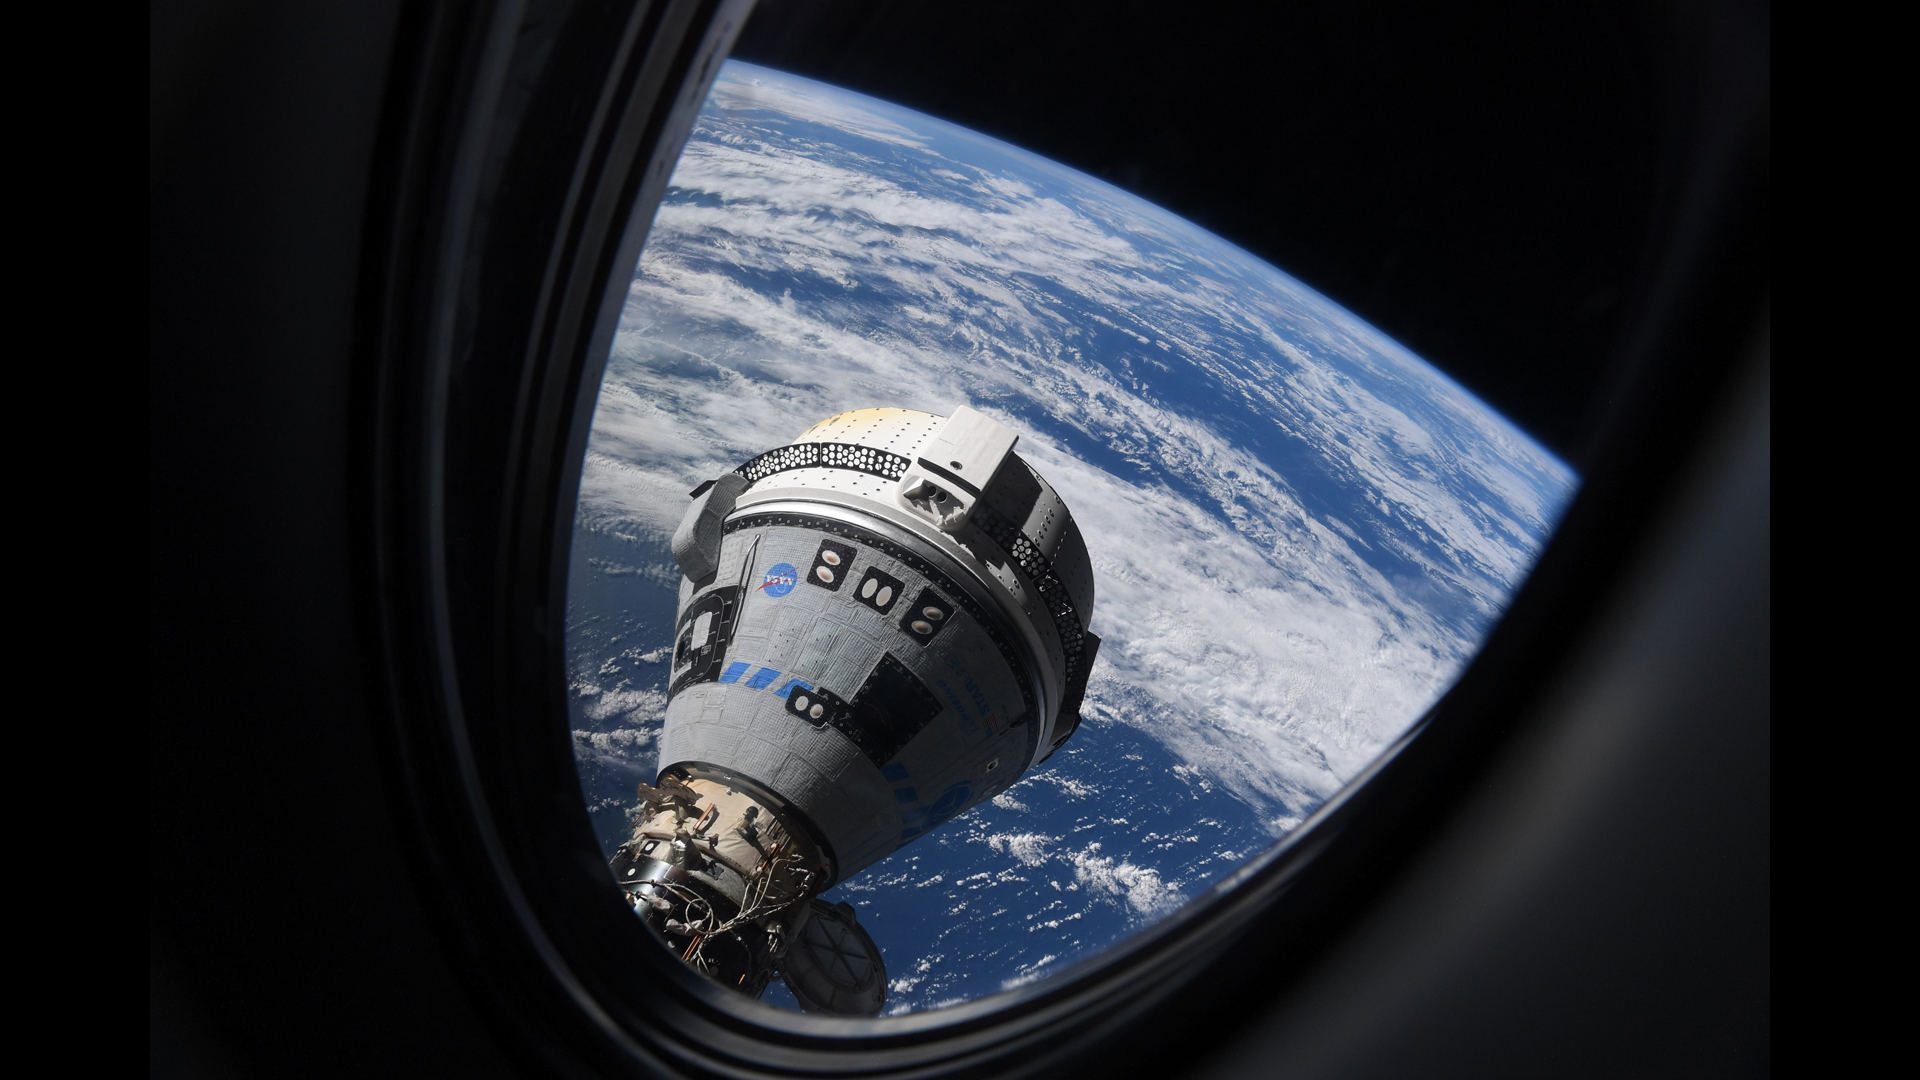 Boeing's 1st Starliner astronaut flight delayed to April 2023